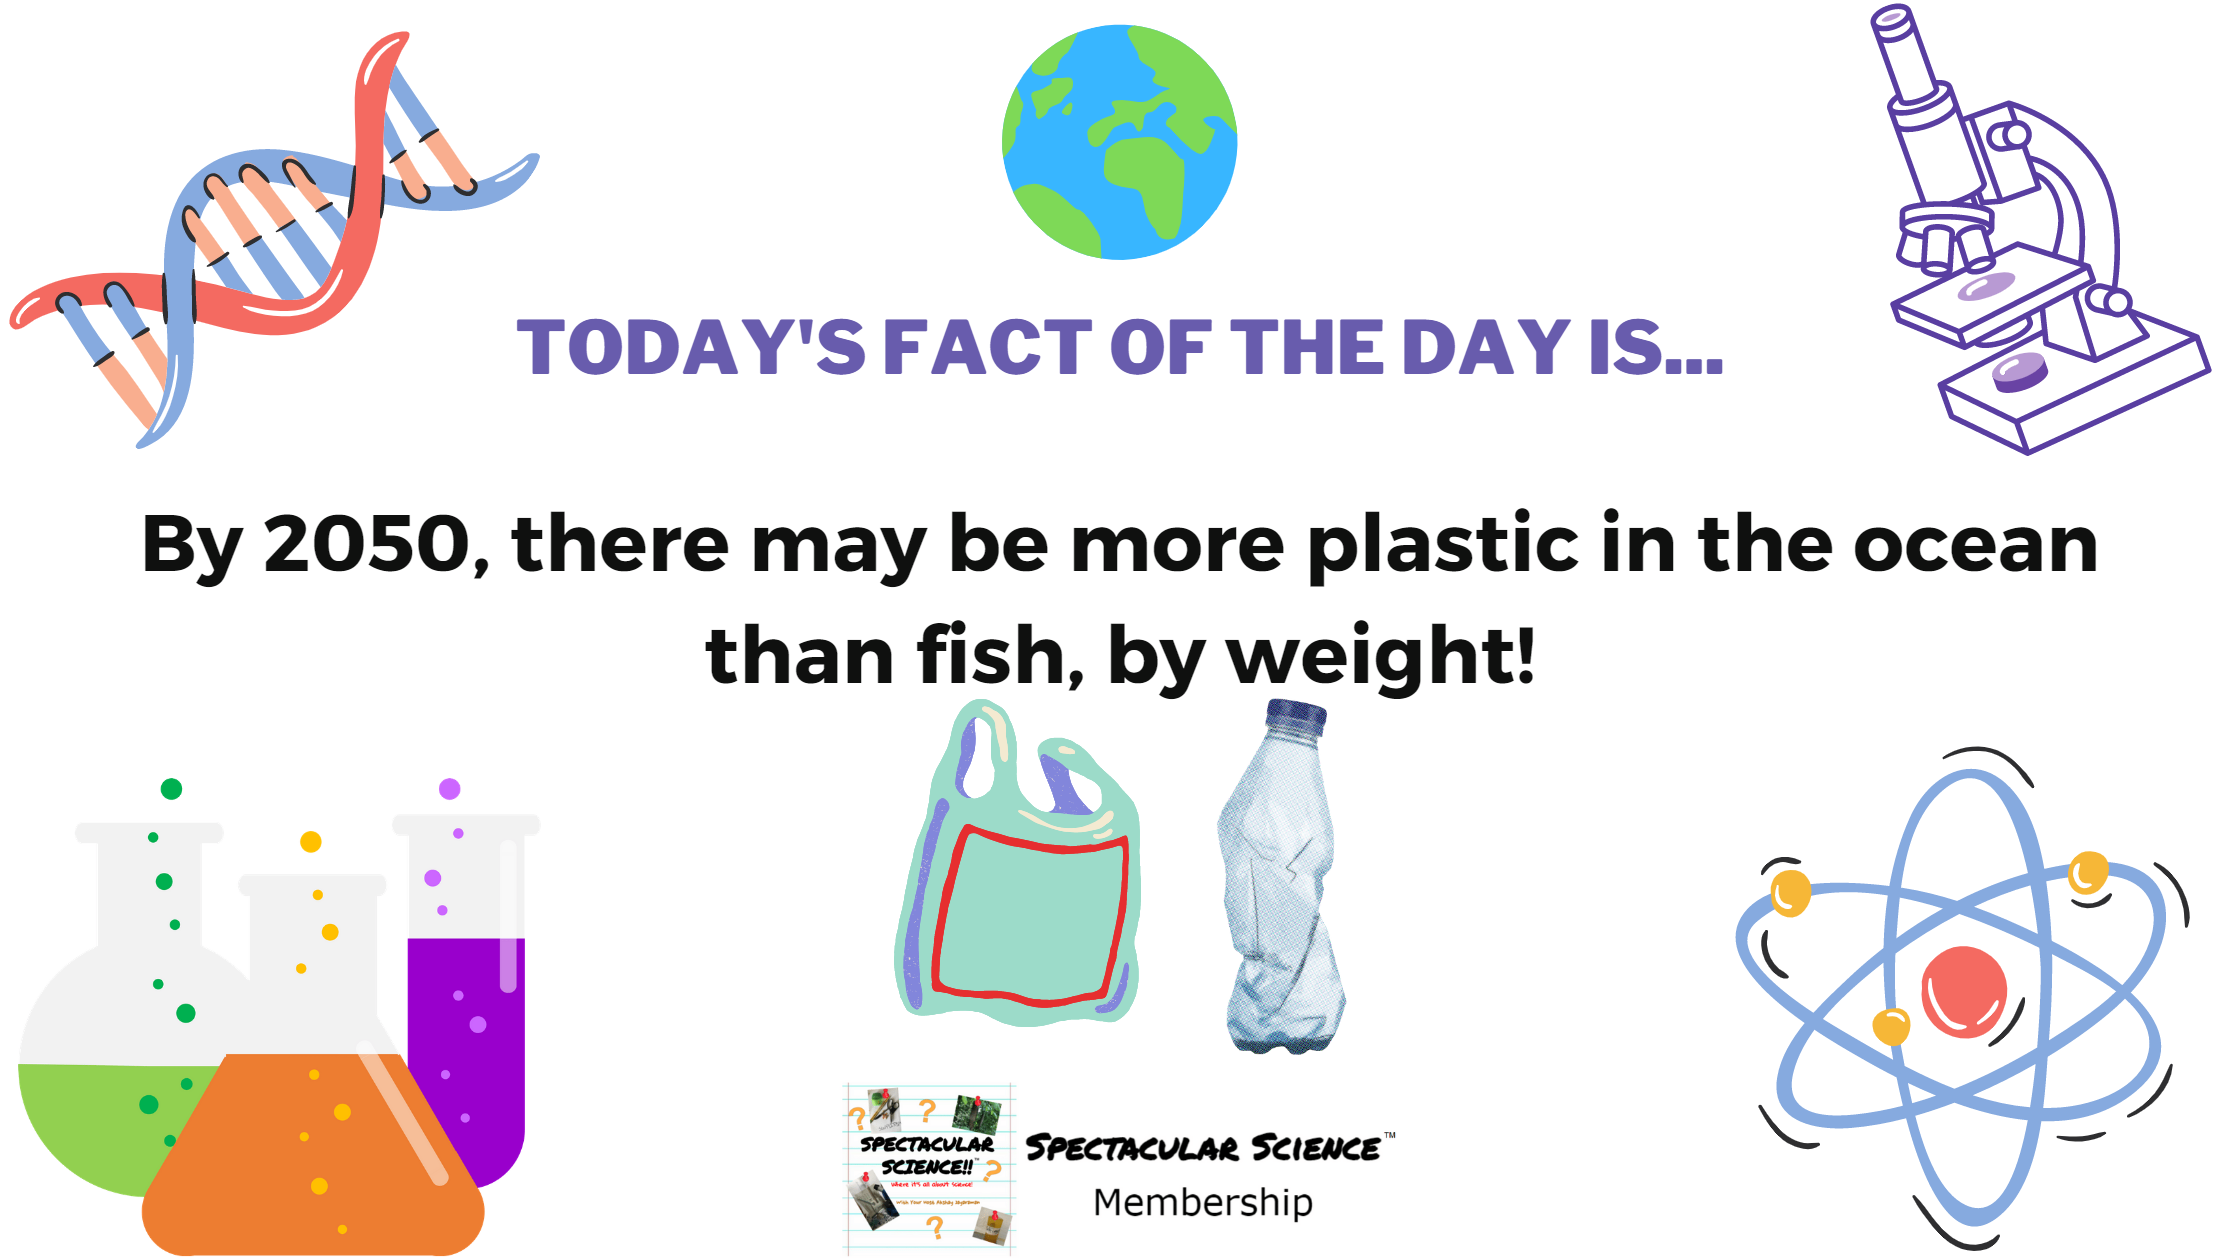 Fact of the Day Image February 6th